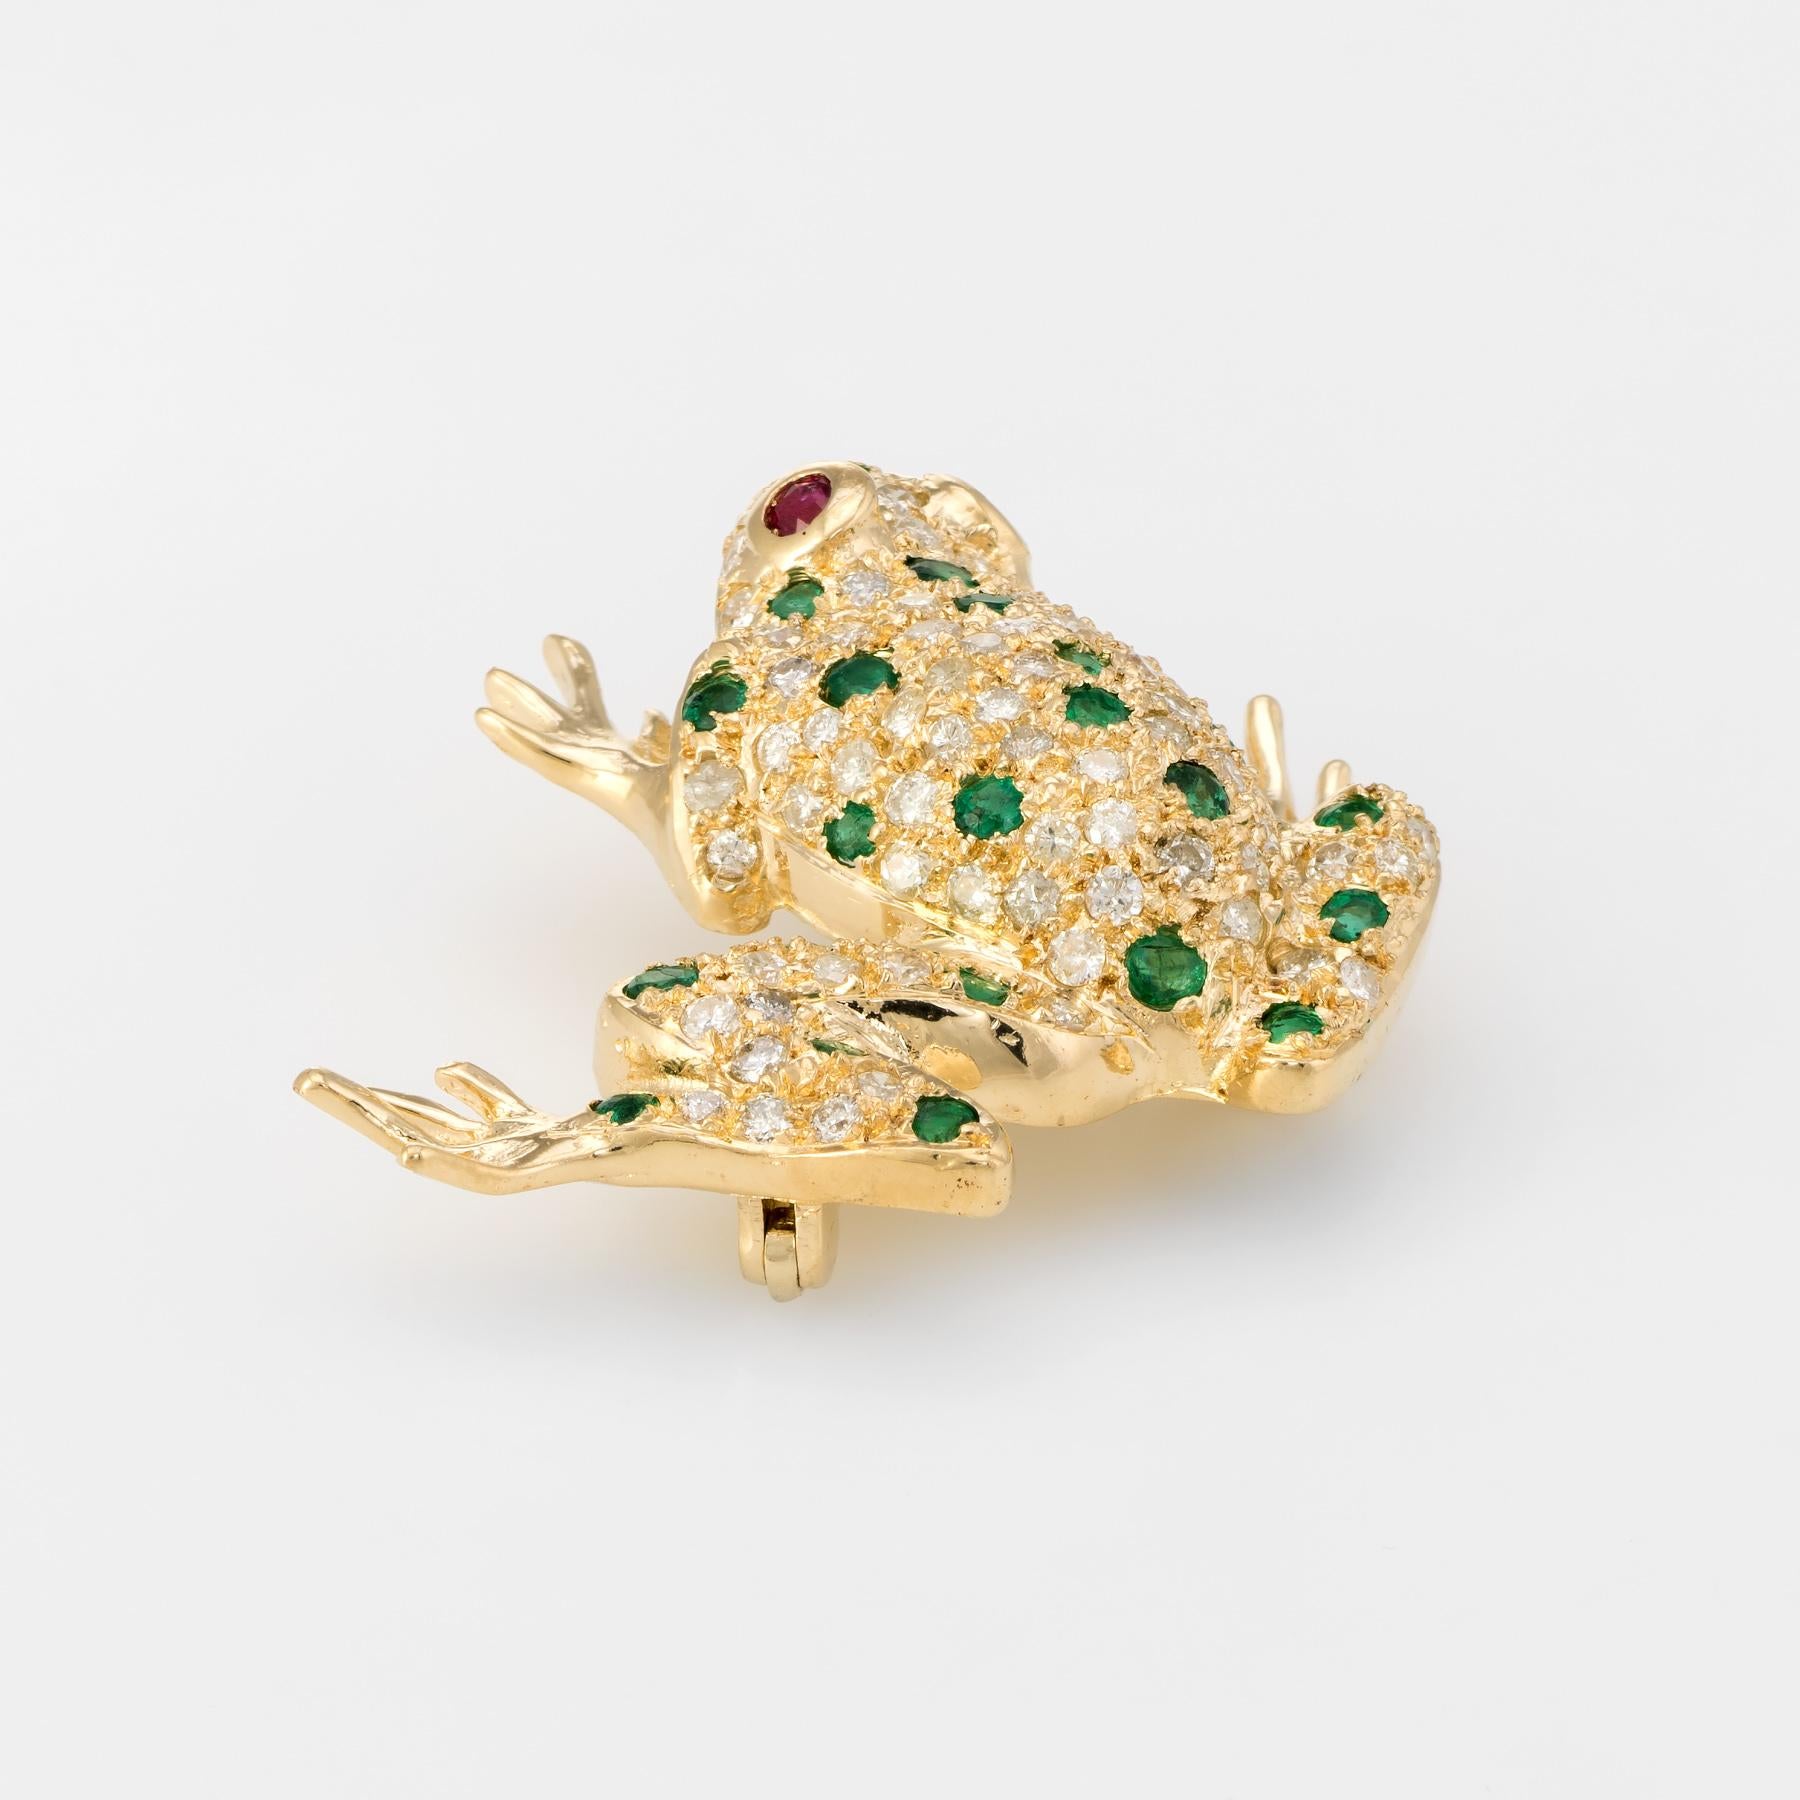 Finely detailed frog pendant (or brooch), crafted in 18 karat yellow gold. 

Emeralds total an estimated 0.23 carats, accented with an estimated 0.04 carats of rubies (embedded into the eyes). The diamonds are pave set into the body of the frog and